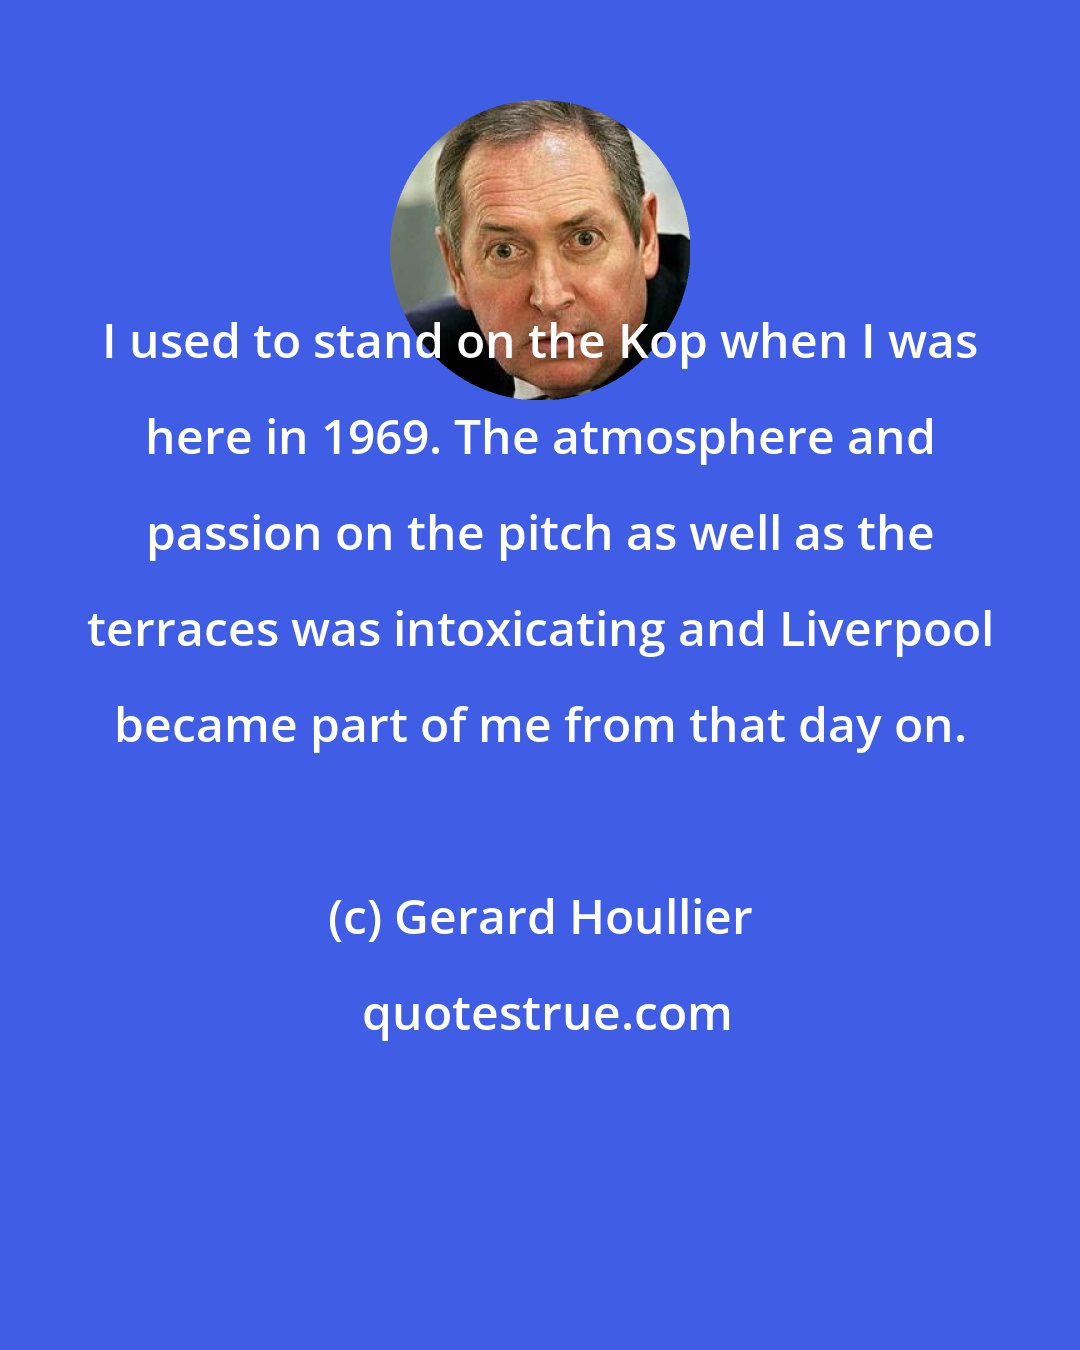 Gerard Houllier: I used to stand on the Kop when I was here in 1969. The atmosphere and passion on the pitch as well as the terraces was intoxicating and Liverpool became part of me from that day on.